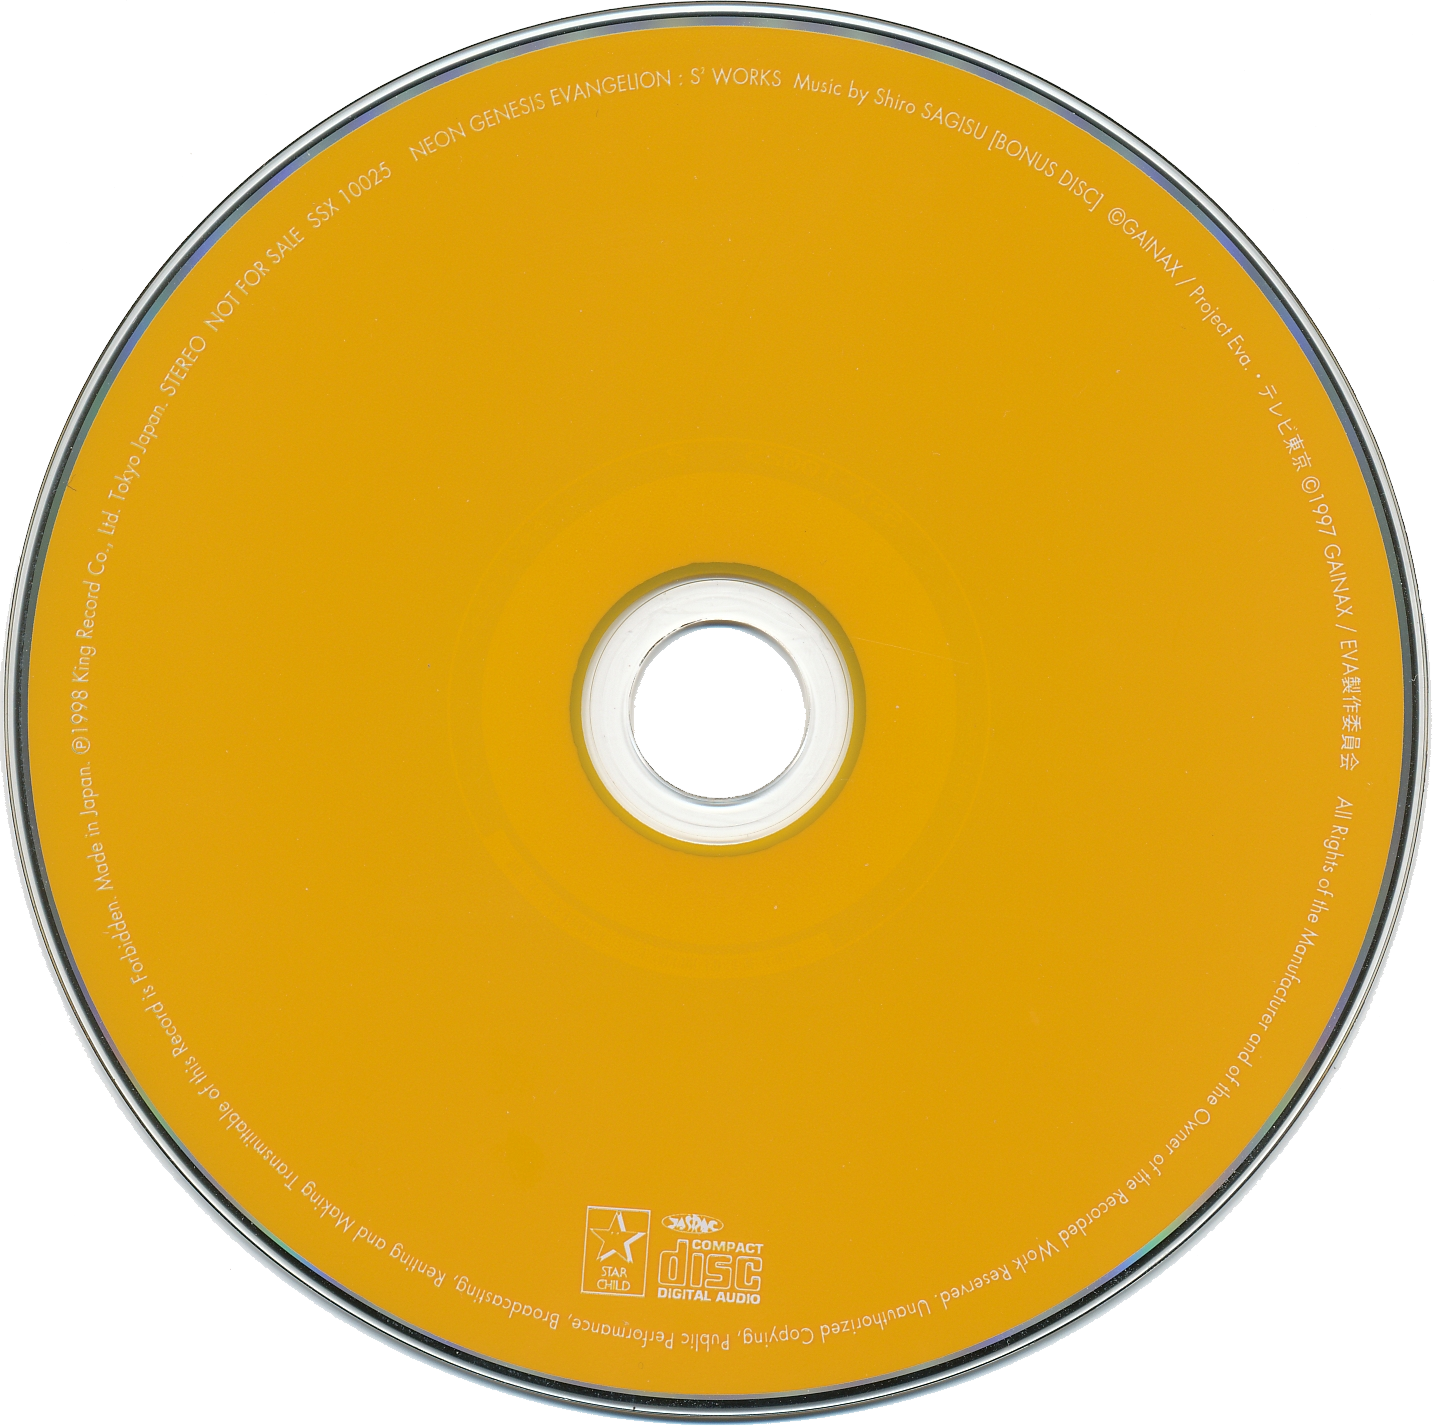 CD/DVD PNG images free download, CD png, DVD png